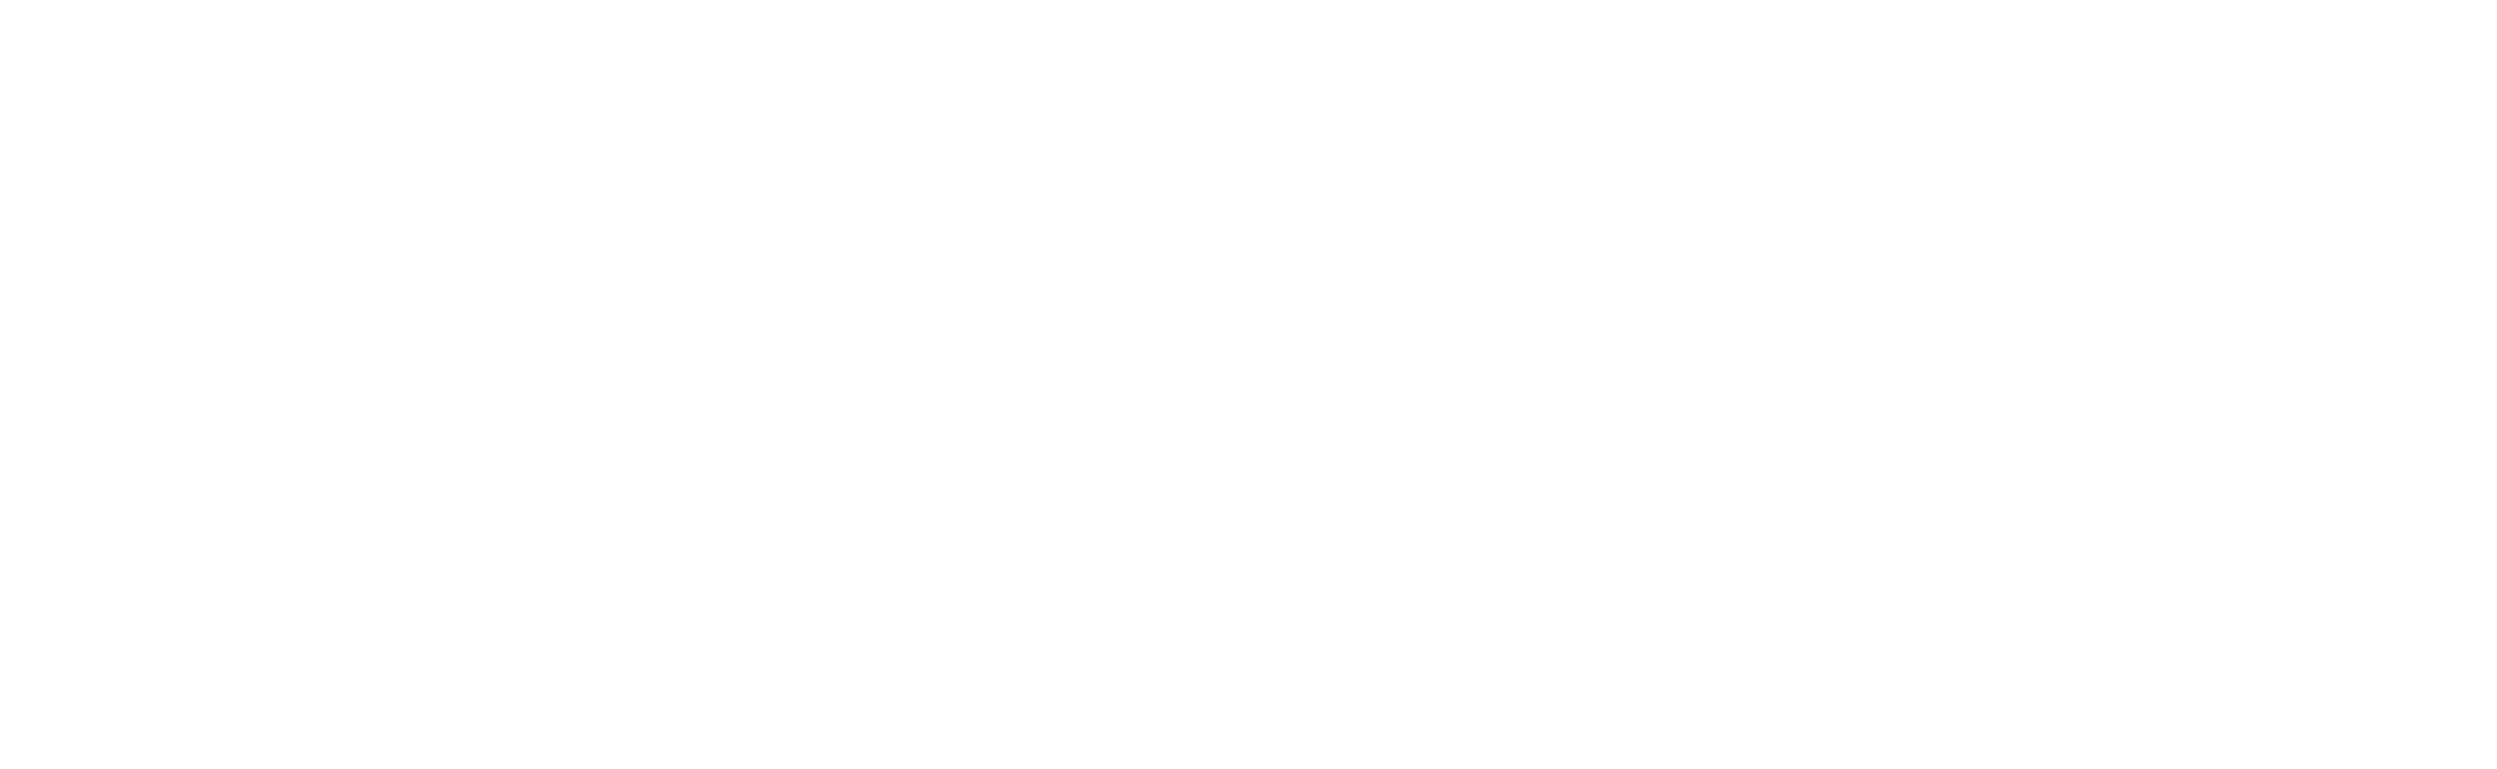 Ayres Hotel & Spa Mission Viejo - Lake Forest Logo